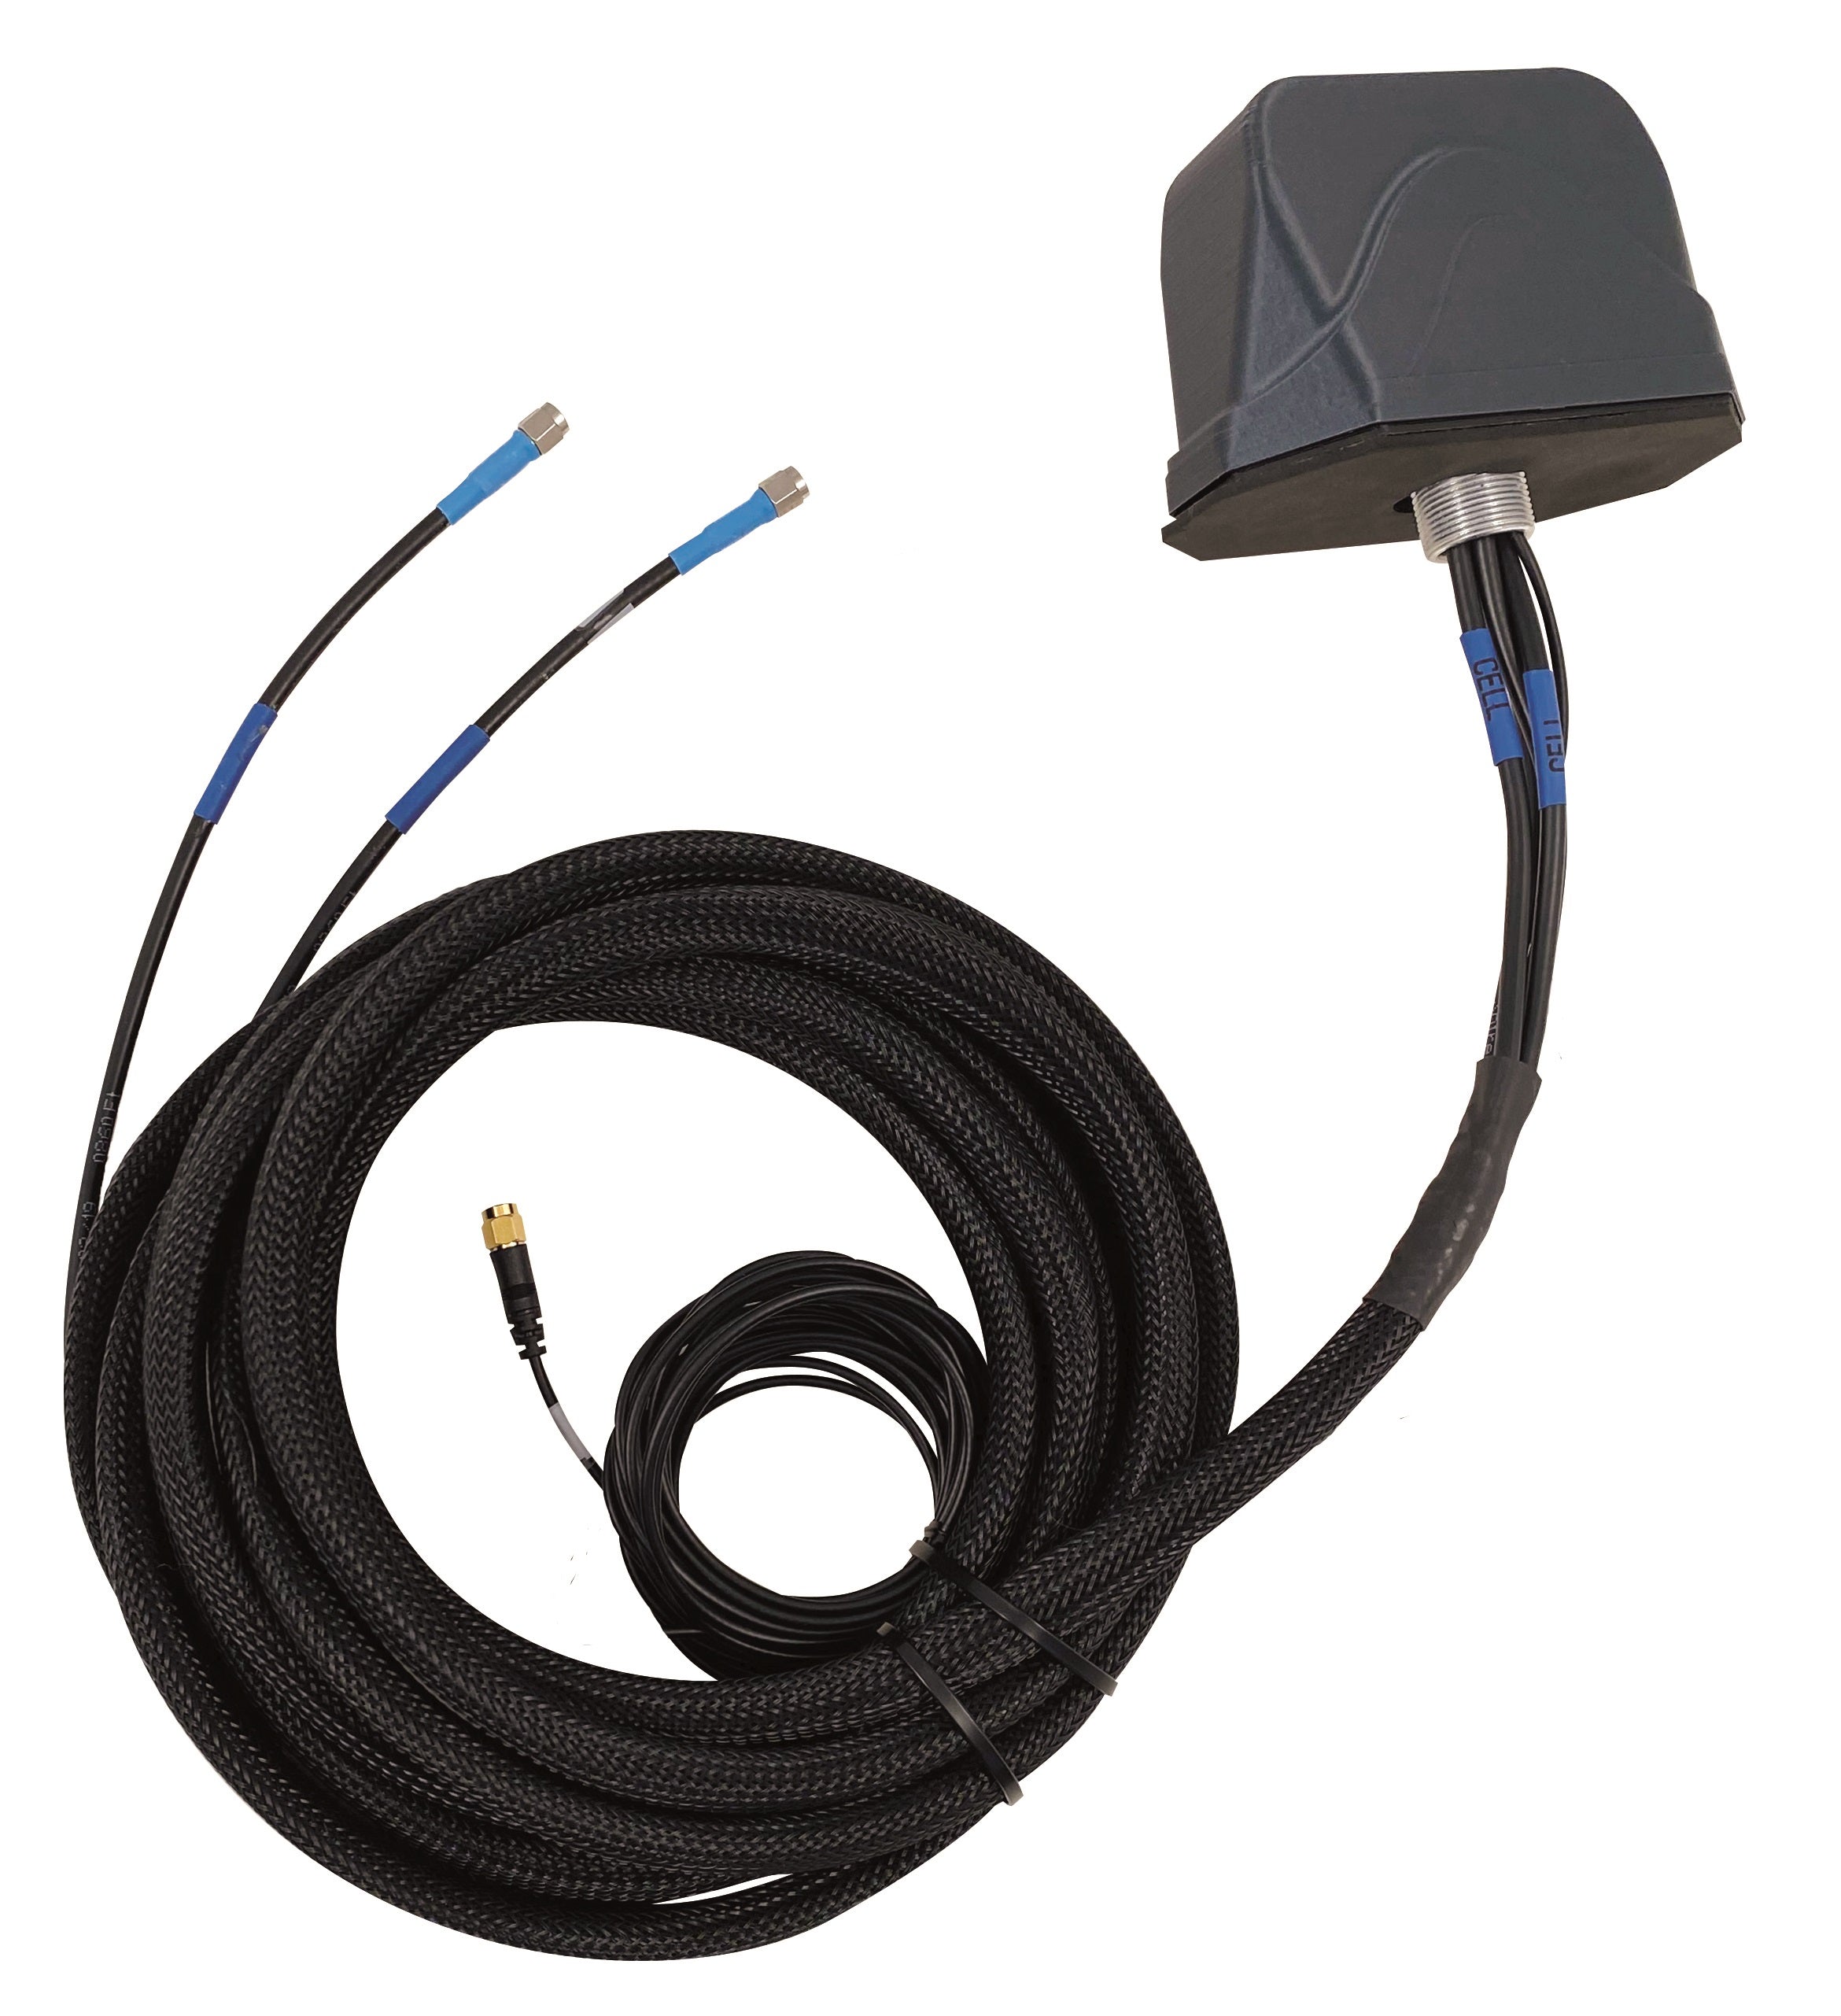 MIMO LTE and GNSS Vehicular Antenna Direct Mount with 18ft Cables, 2 Thick Foam Pads, 3x SMA-Male Connectors | RM2D-G44-18-SSS-B